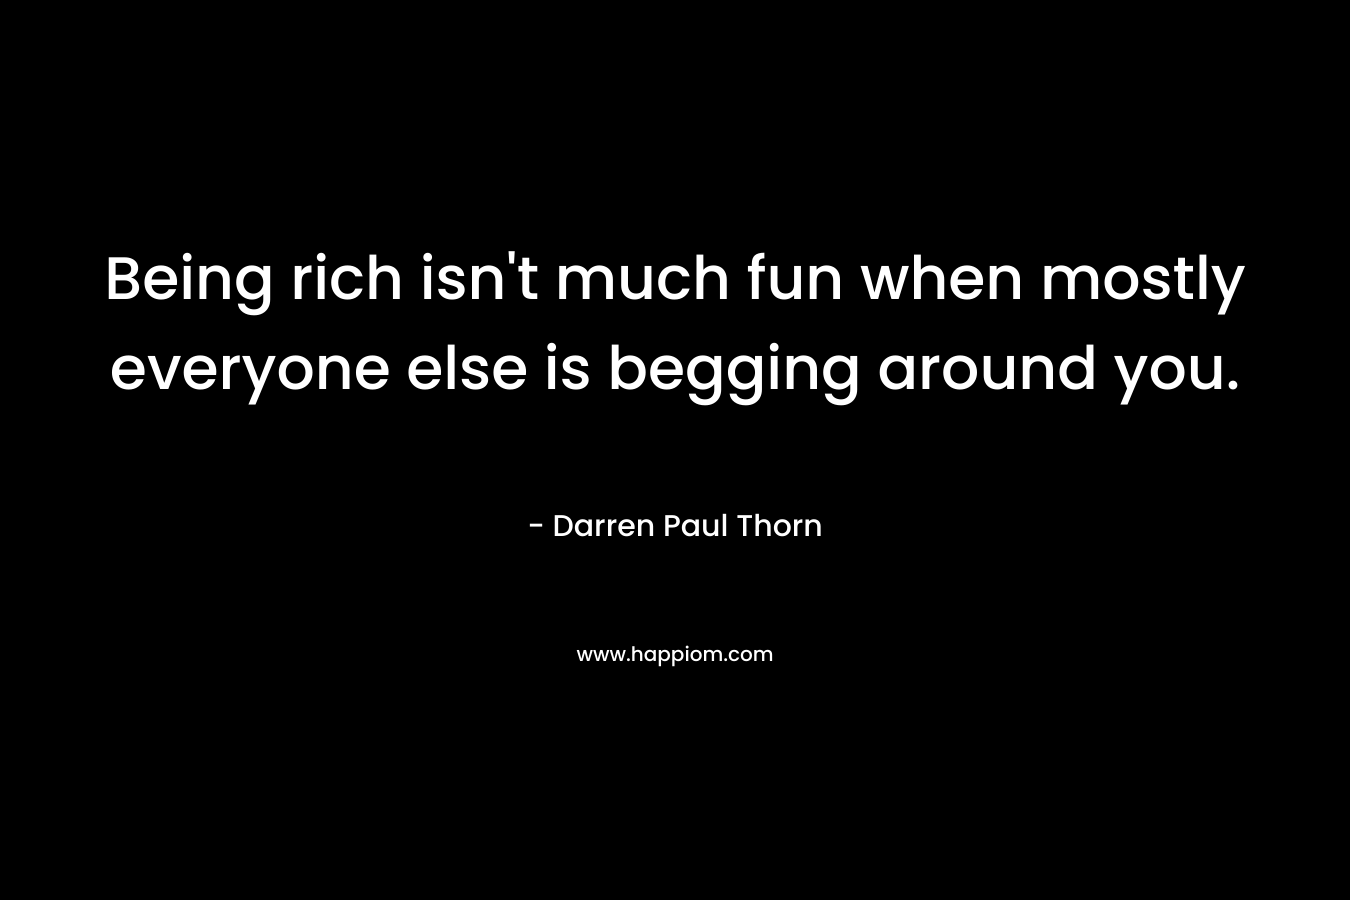 Being rich isn’t much fun when mostly everyone else is begging around you. – Darren Paul Thorn